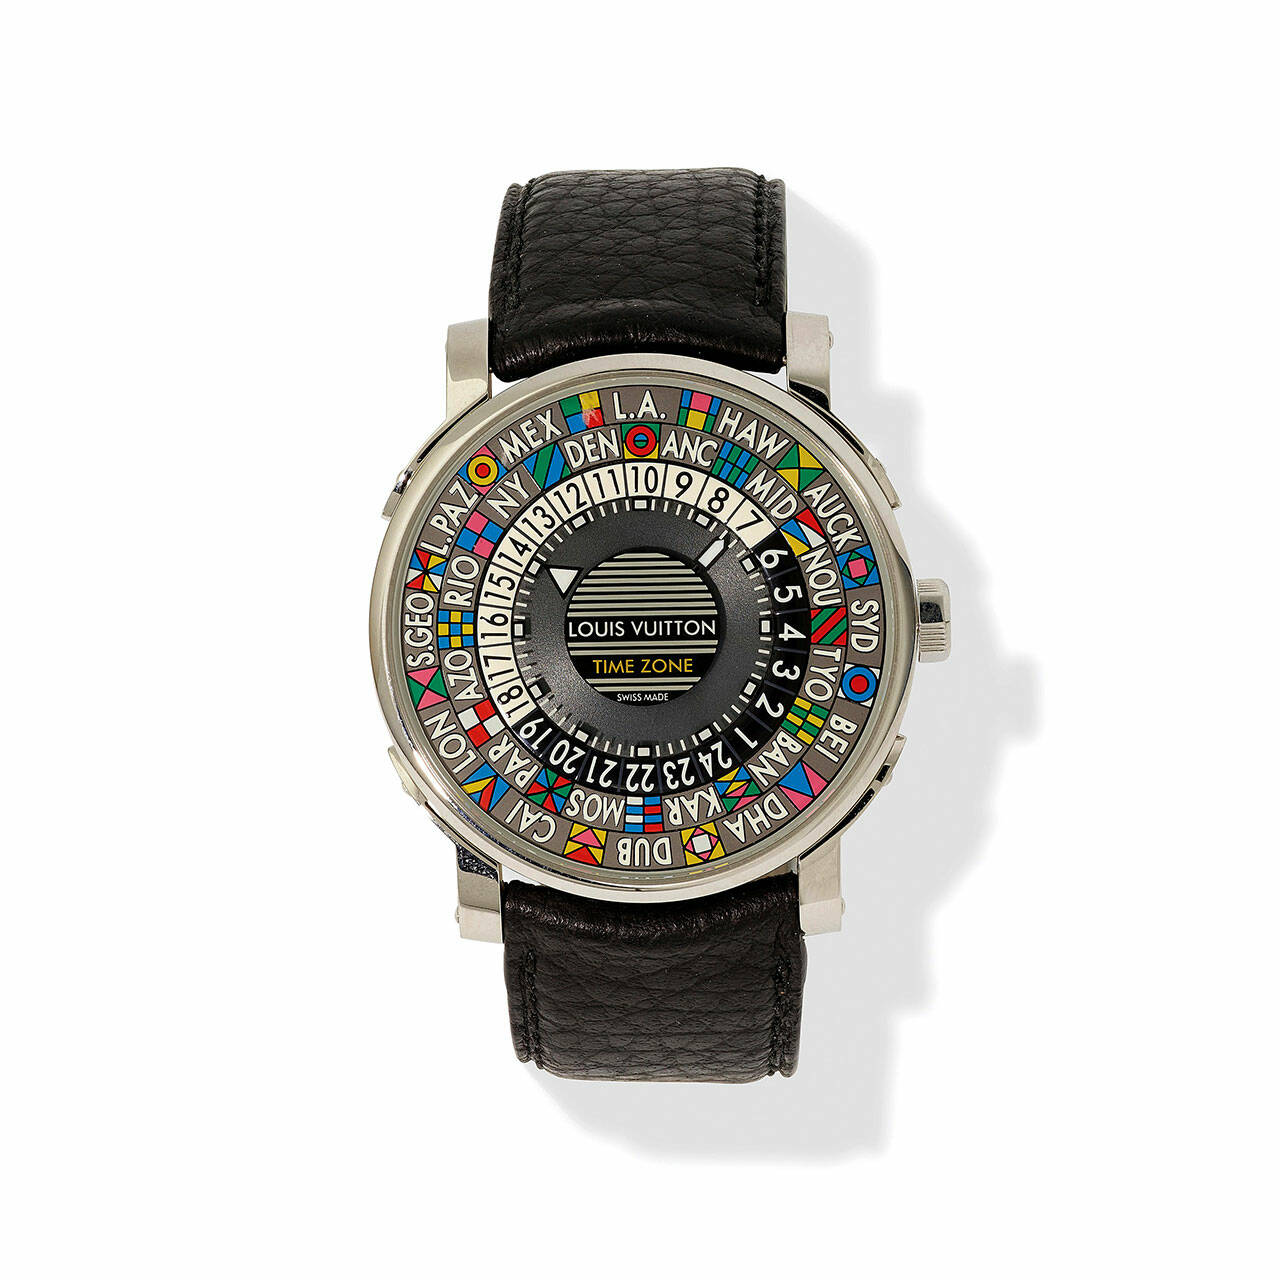 Round Analog Louis Vuitton Watch, For Daily